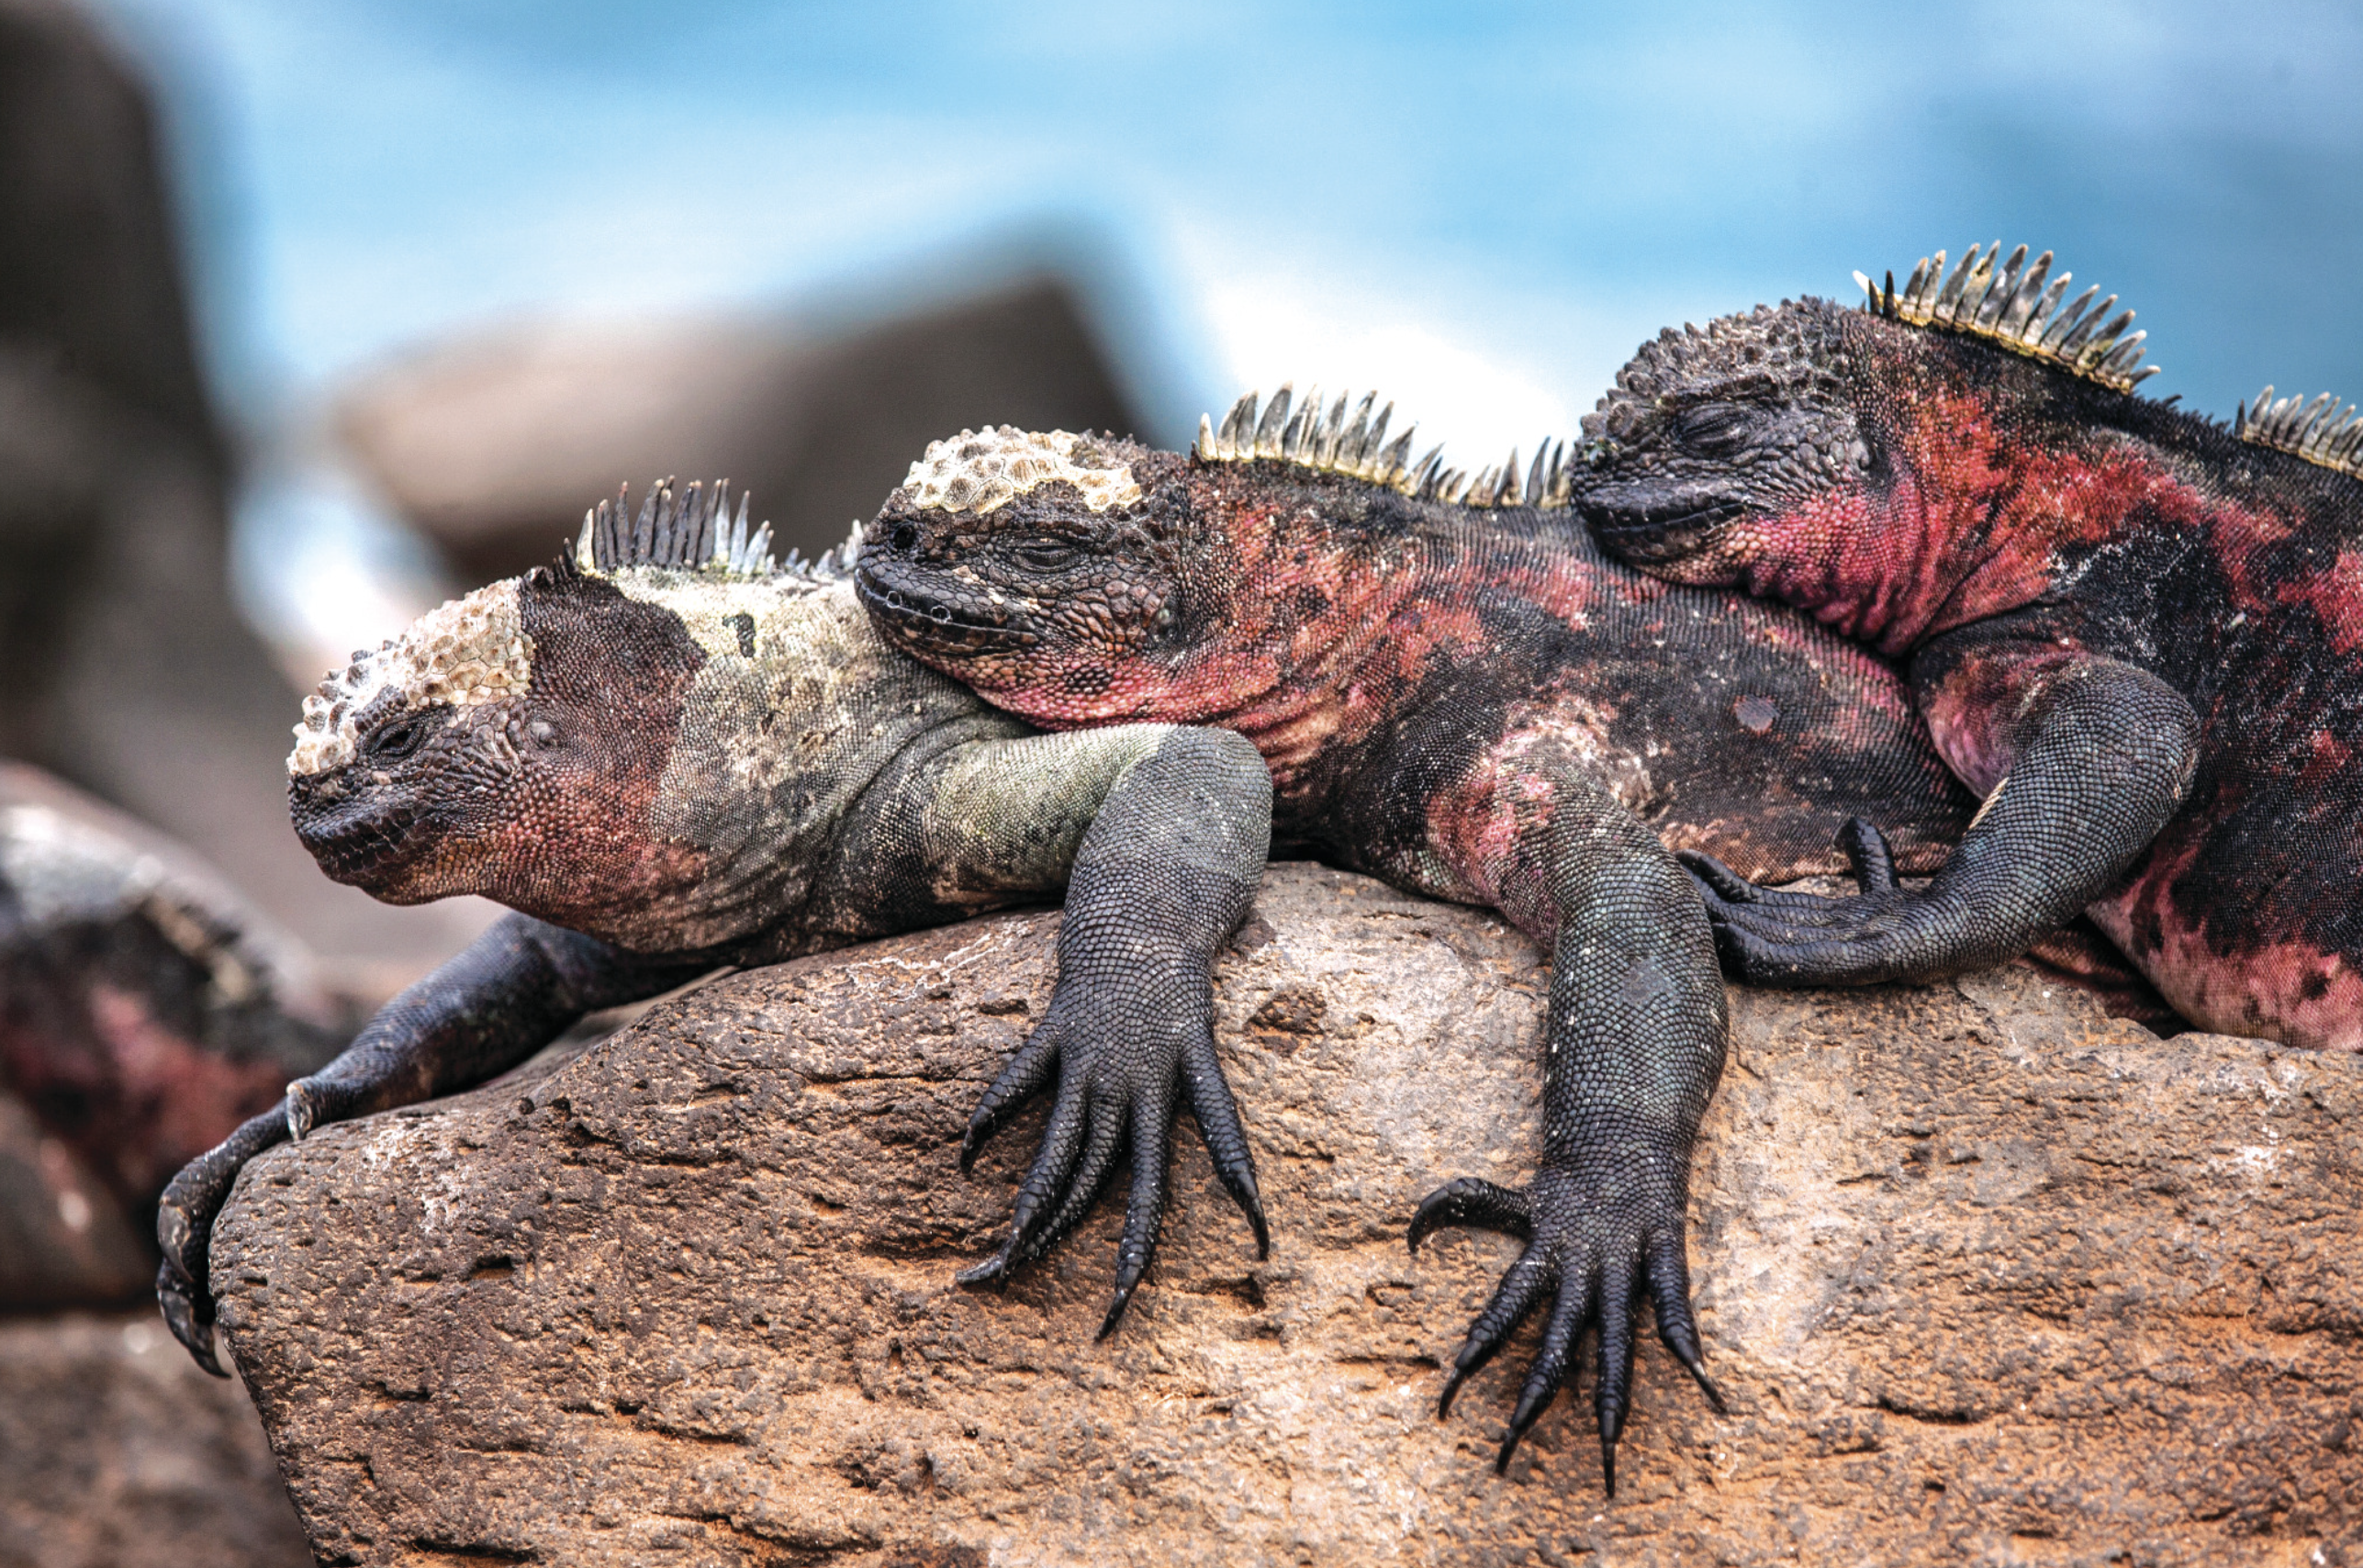 Origin of the species in the Galapagos Islands